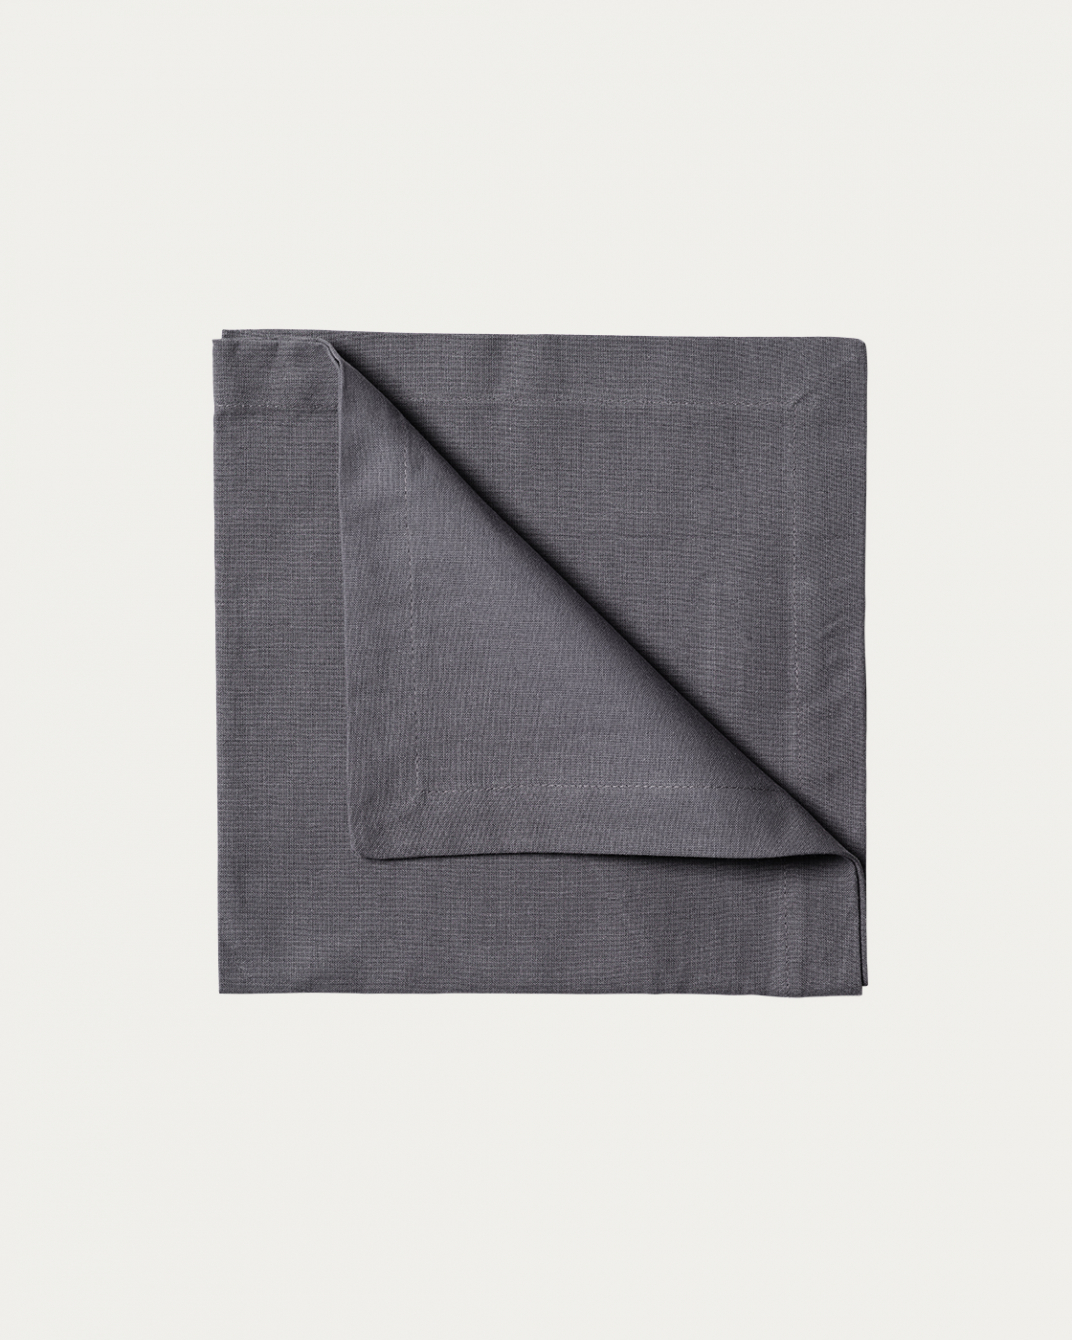 Product image granite grey ROBERT napkin made of soft cotton from LINUM DESIGN. Size 45x45 cm and sold in 4-pack.